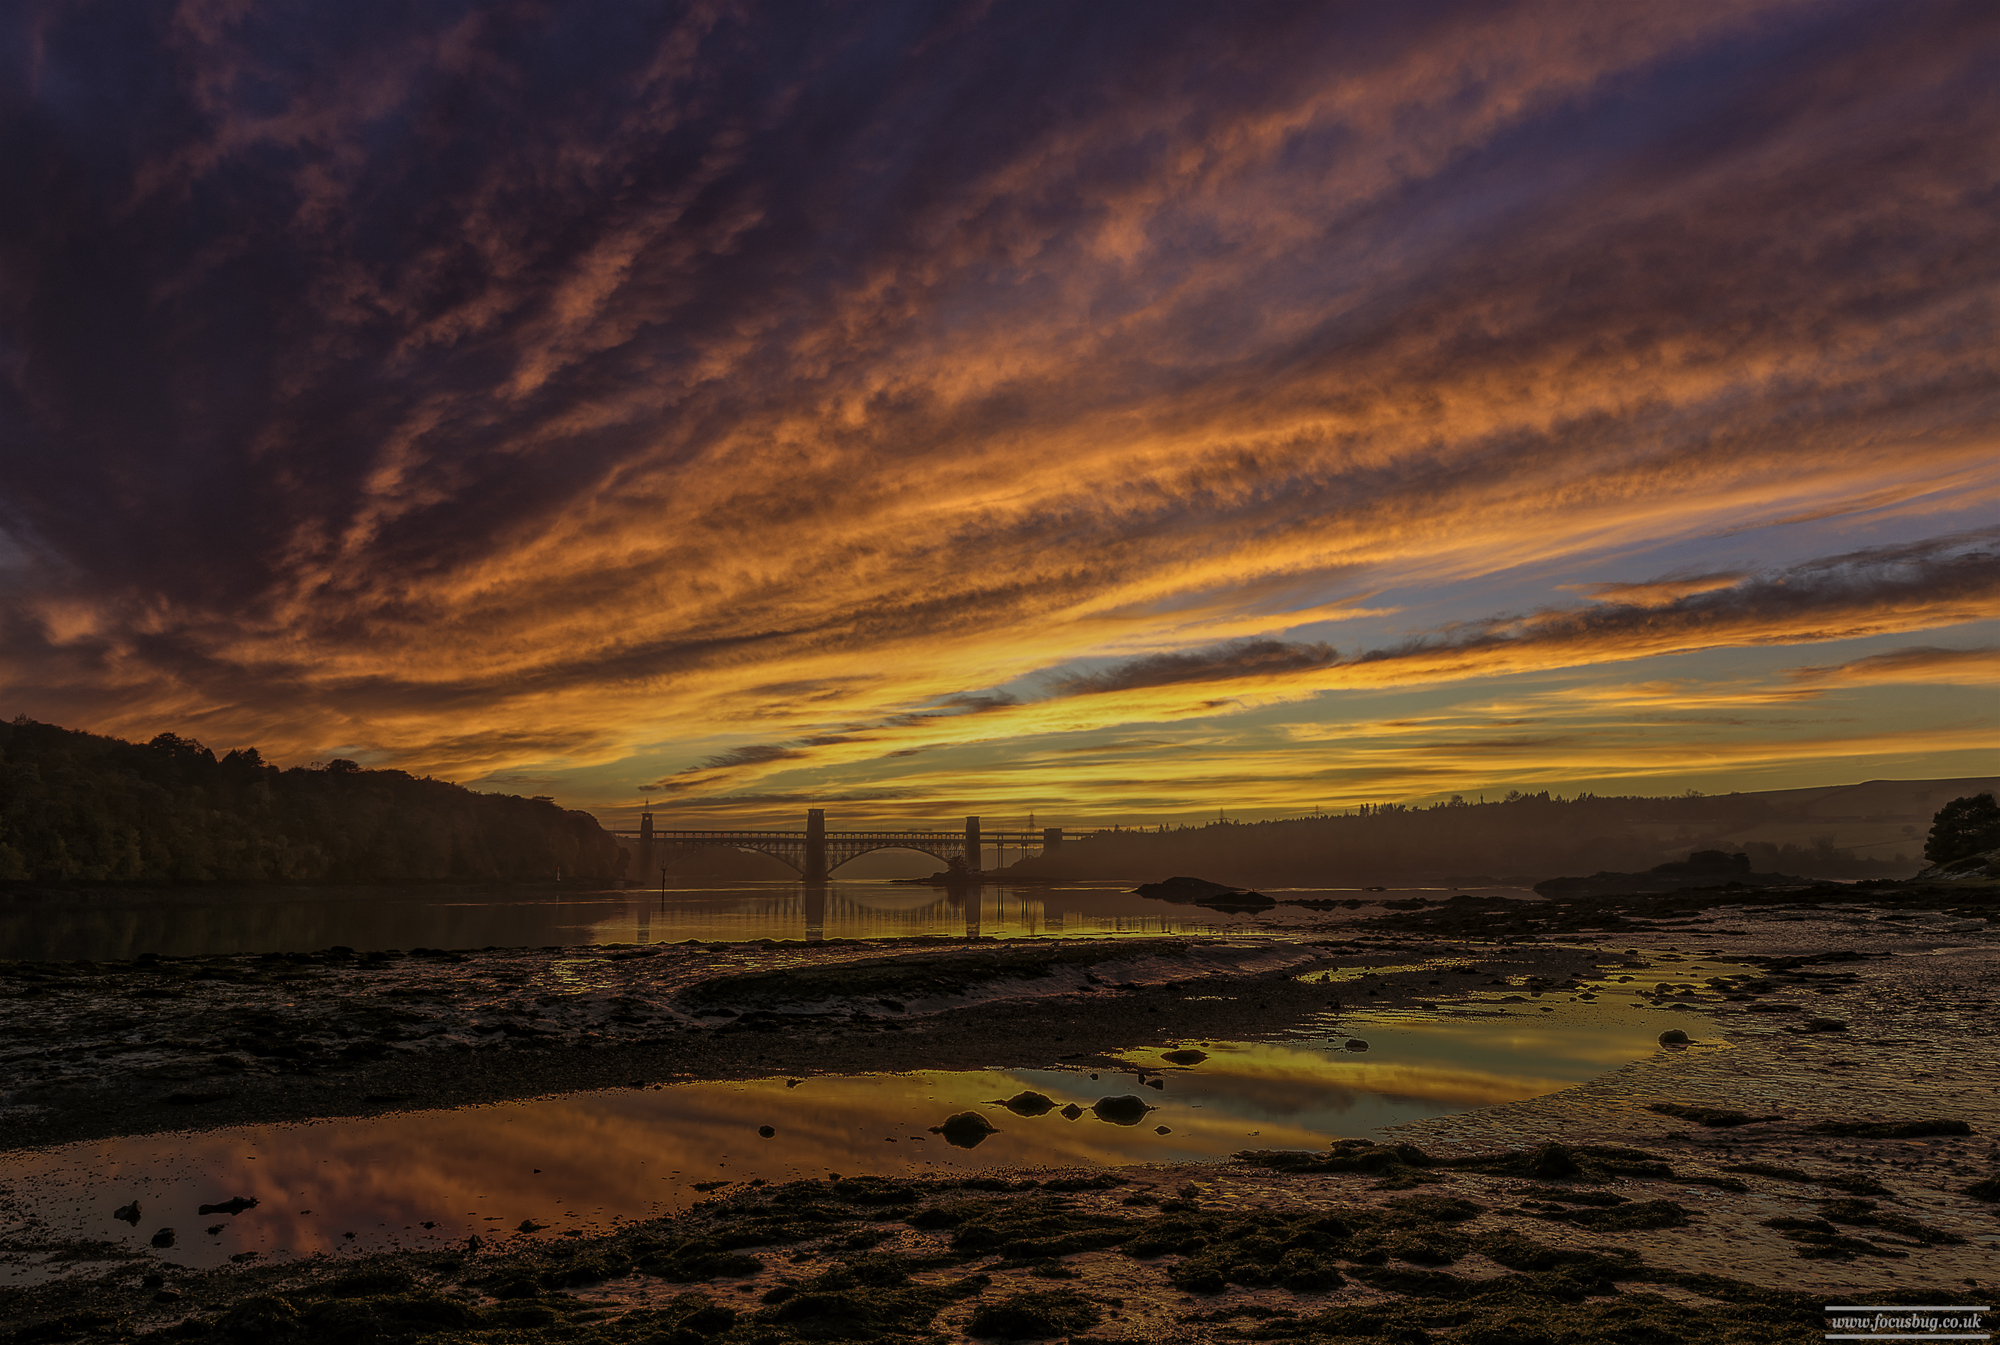 Anglesey Landscape Photography - Brittania Bridge Sunset Anglesey, North Wales